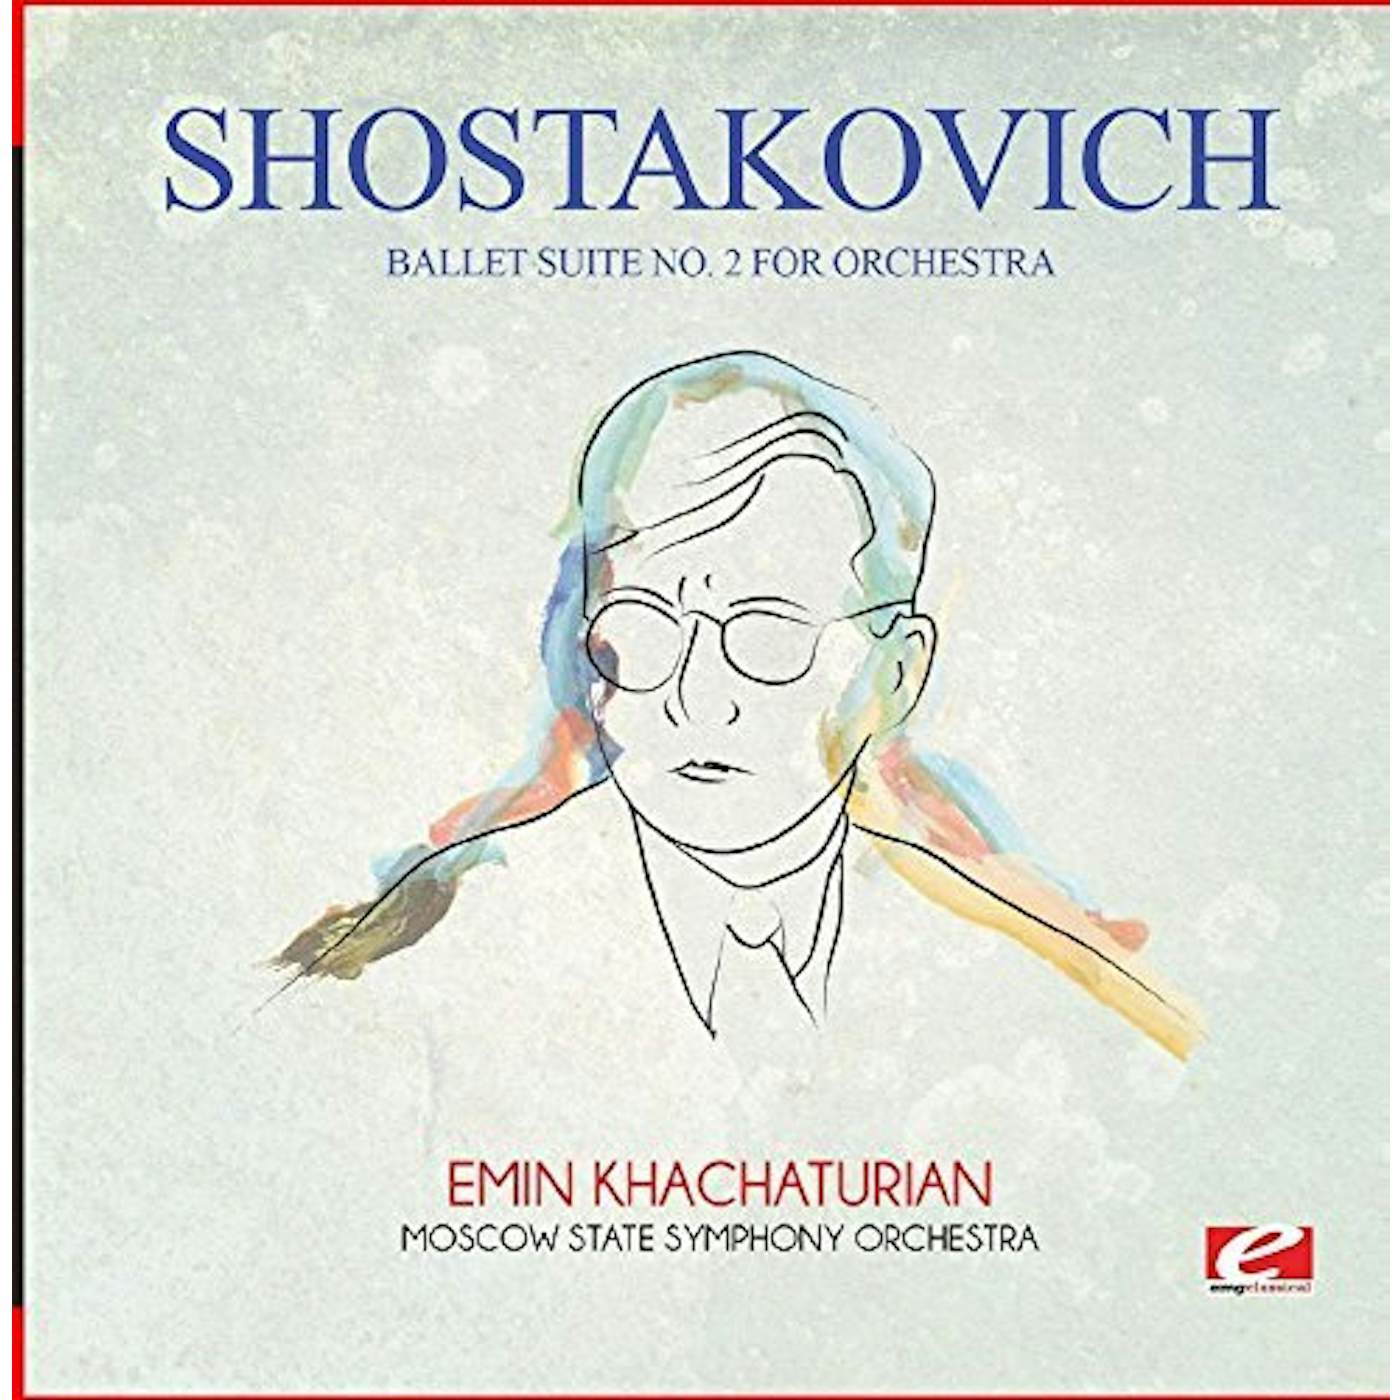 Shostakovich BALLET SUITE NO. 2 FOR ORCHESTRA CD